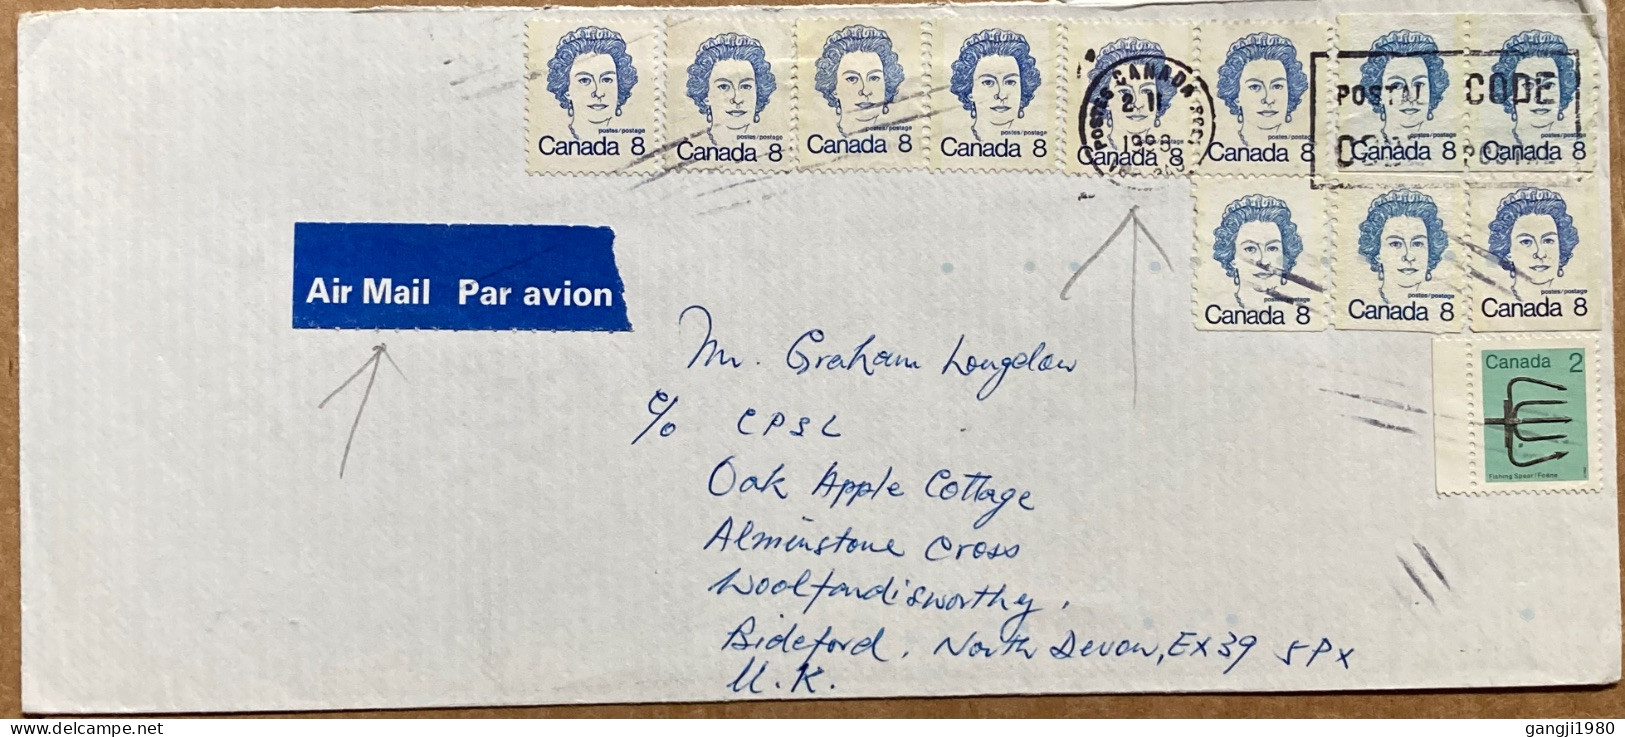 CANADA 1988, COVER USED TO ENGLAND, MULTI 12 STAMP, QUEEN & FISHING SPEAR, POST CODE, MACHINE SLOGAN CANCEL. - Cartas & Documentos